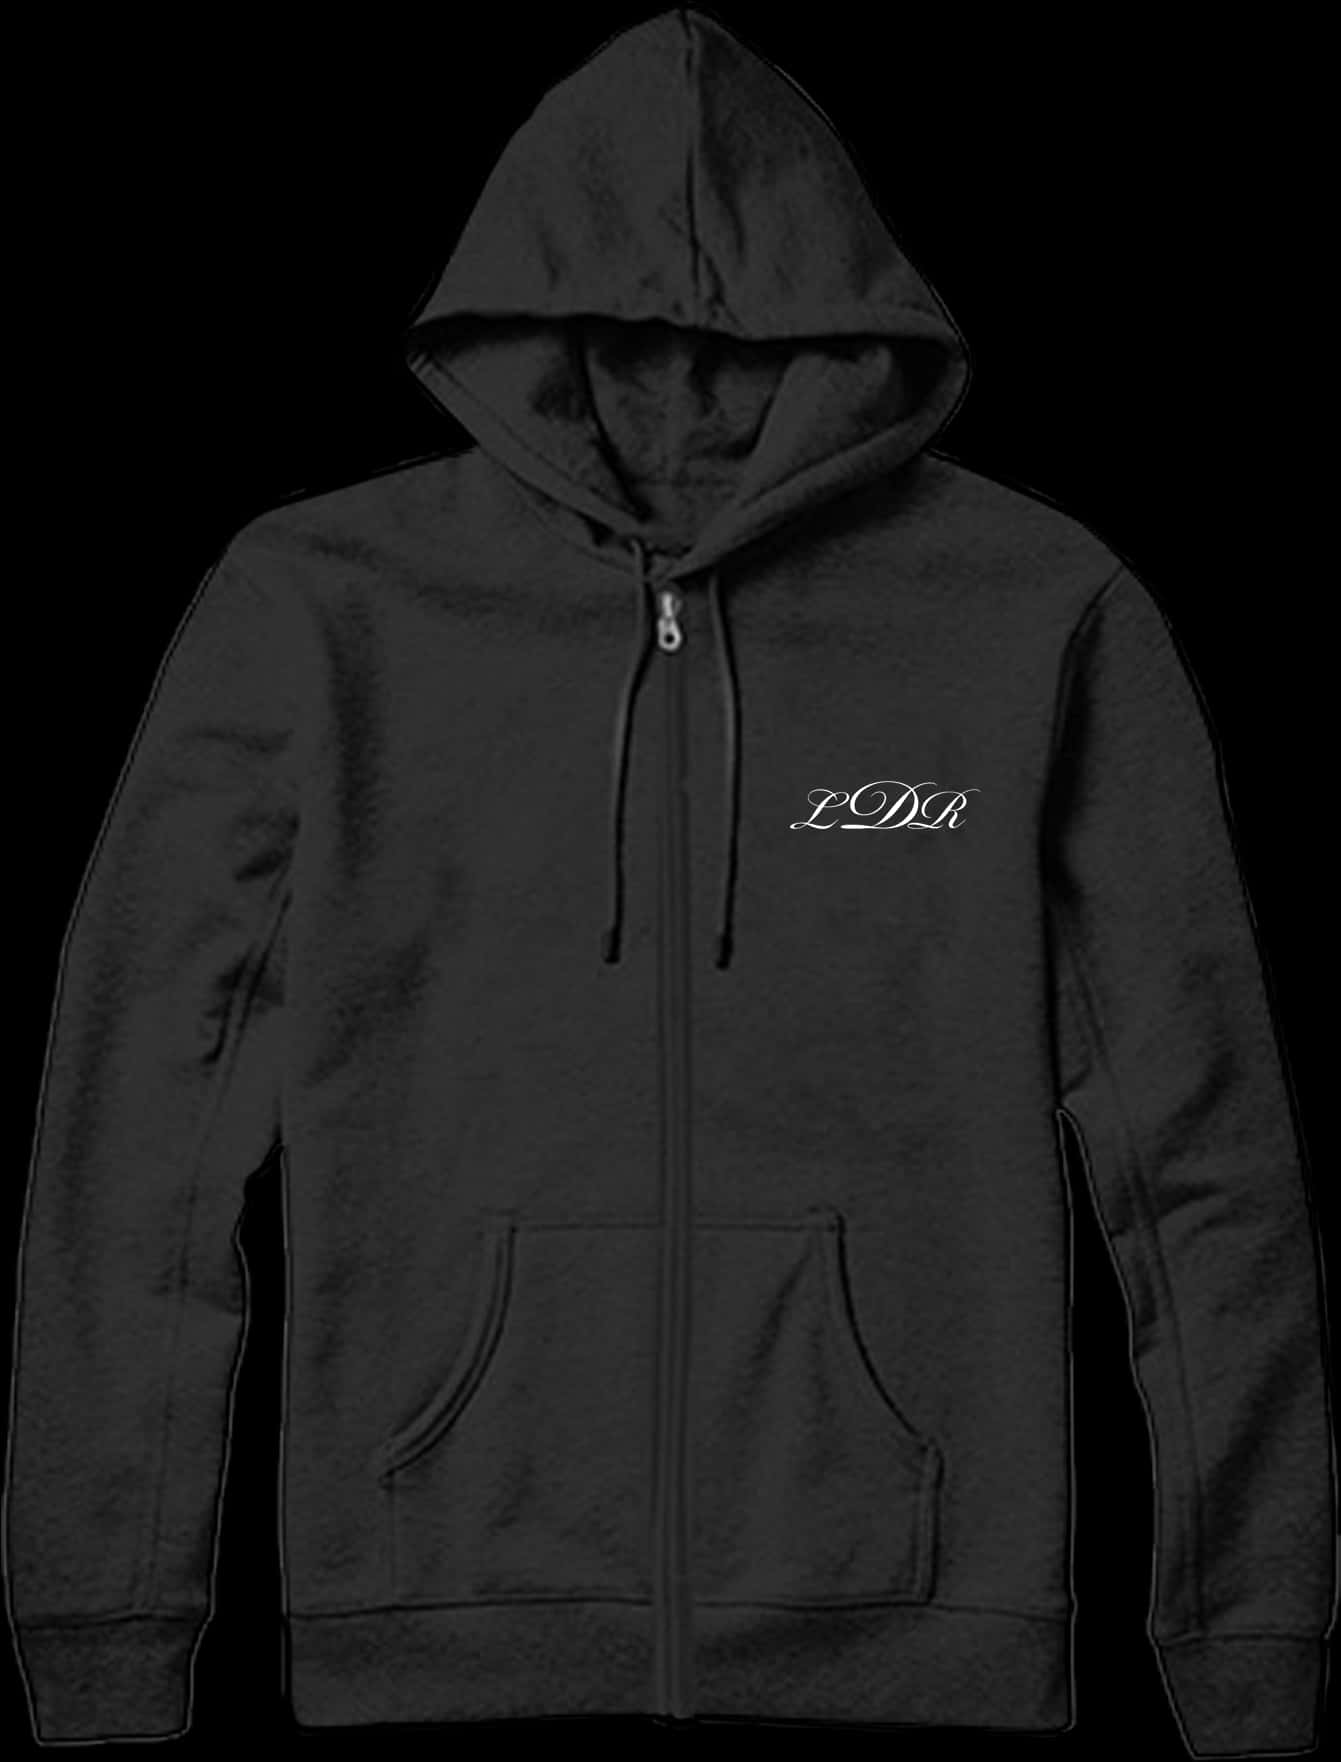 A Black Zip Up Hoodie With White Text